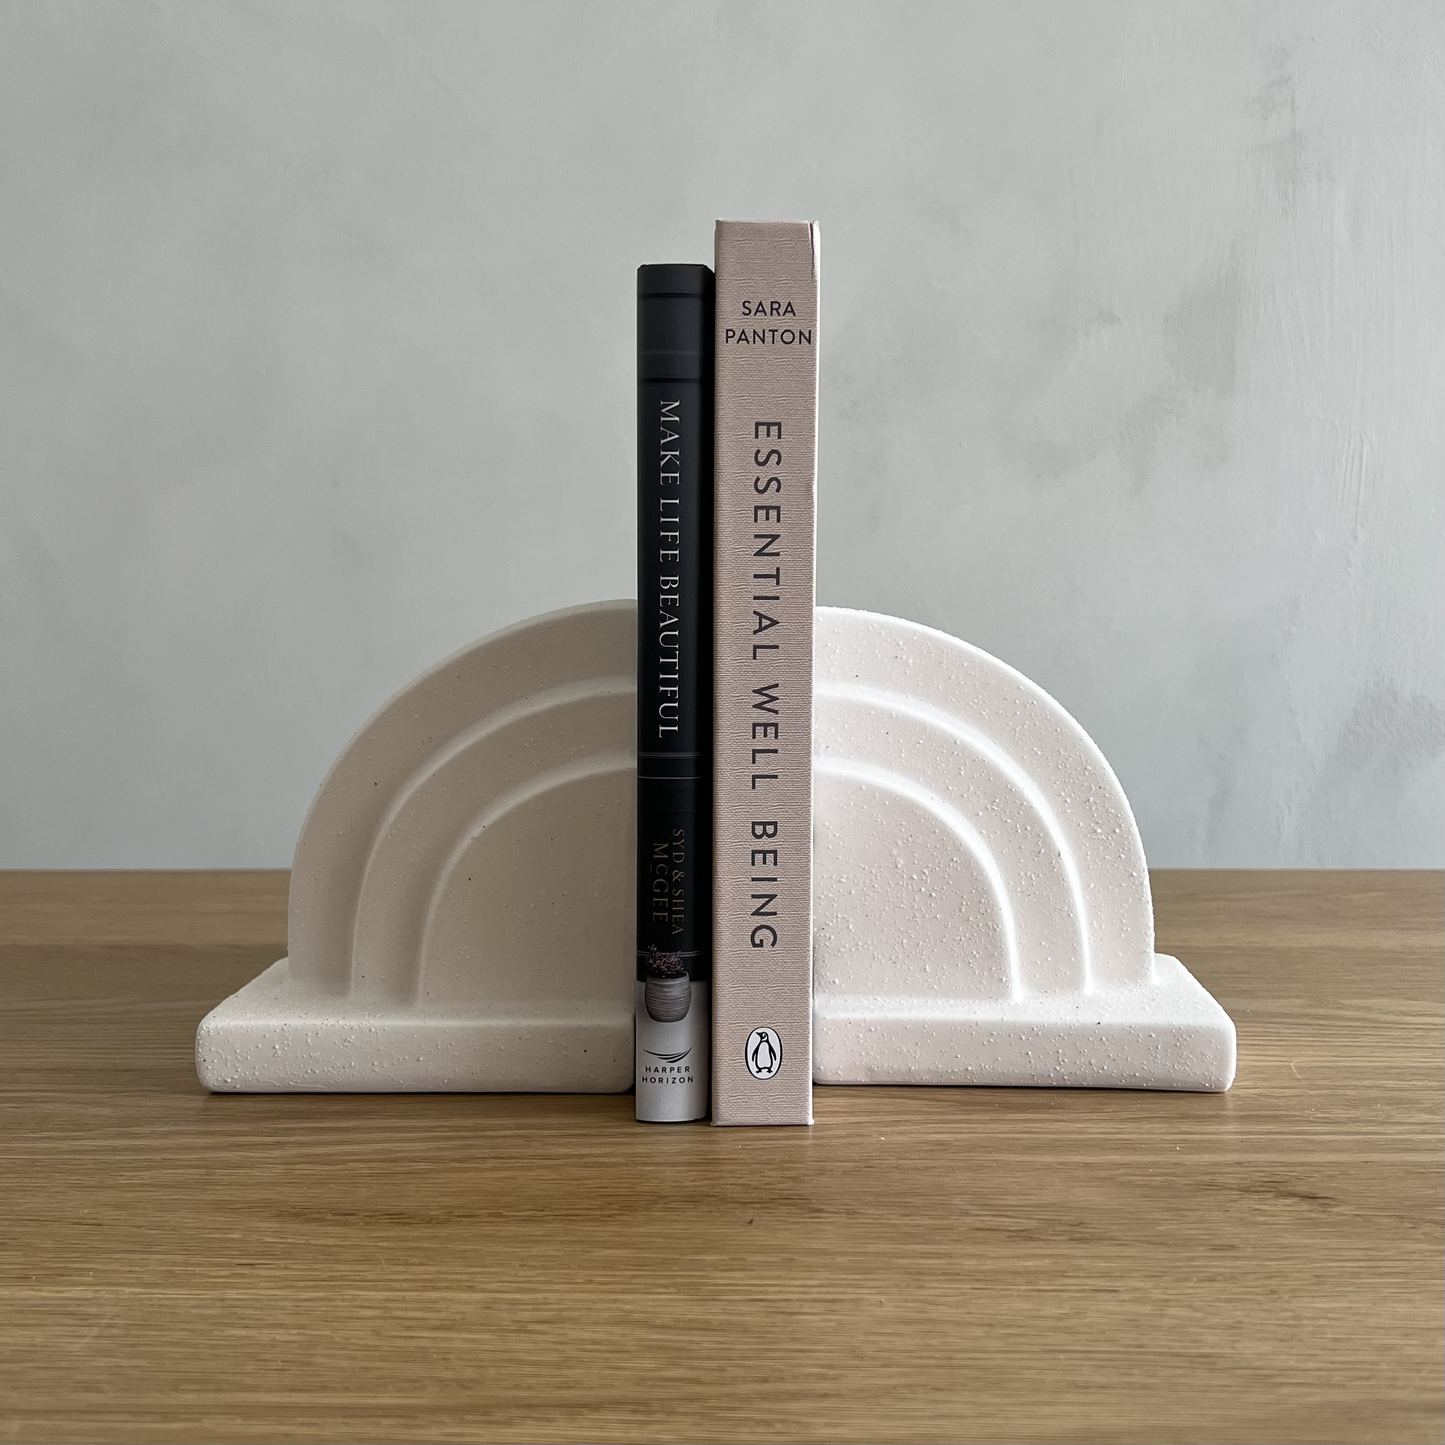 June Curved Bookends